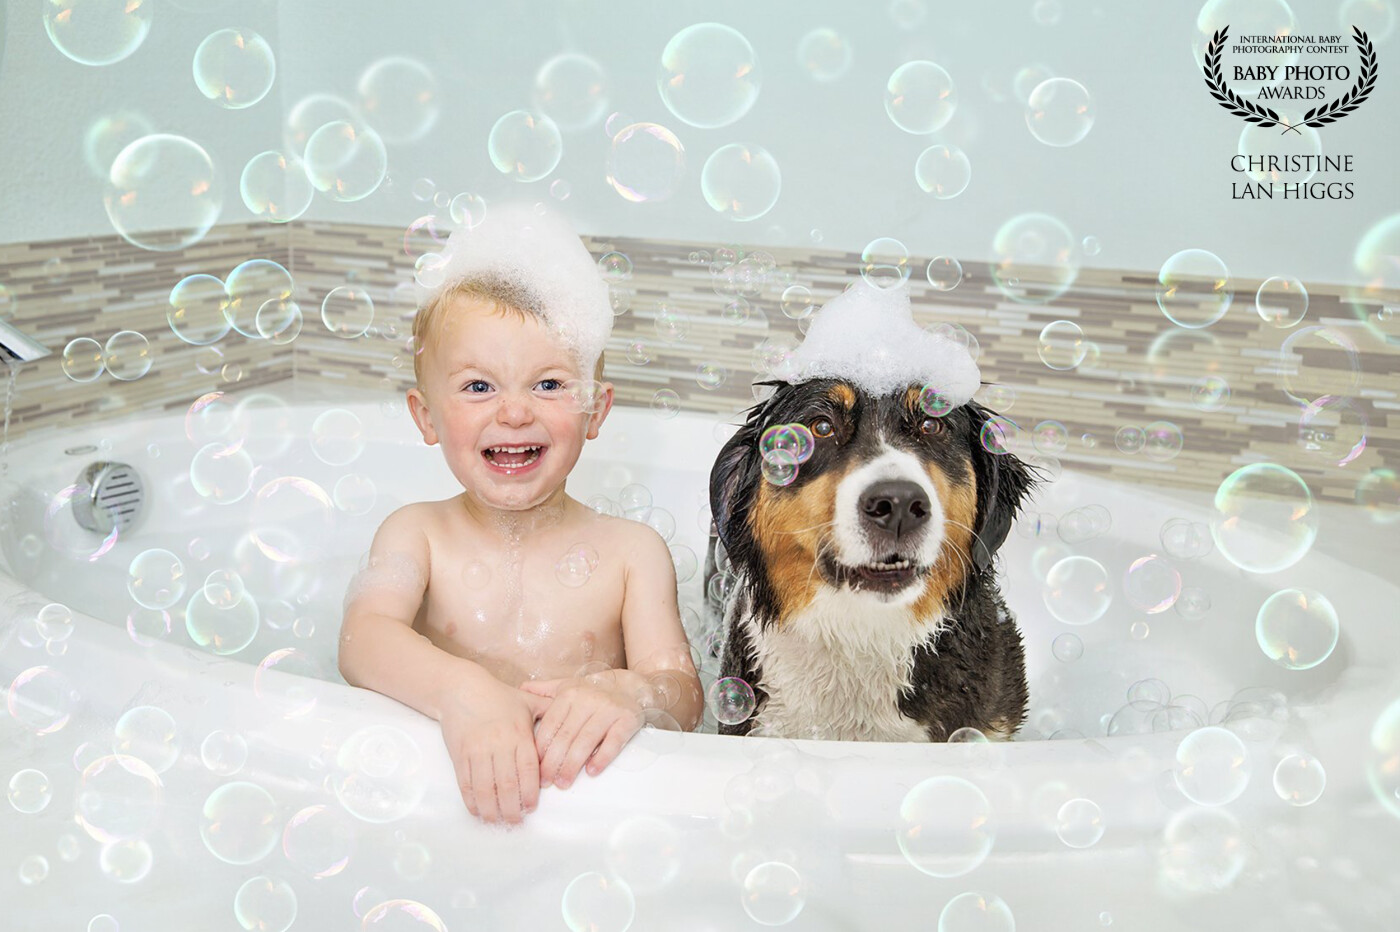 Taking a bubble bath with your furry best friend is so much fun!